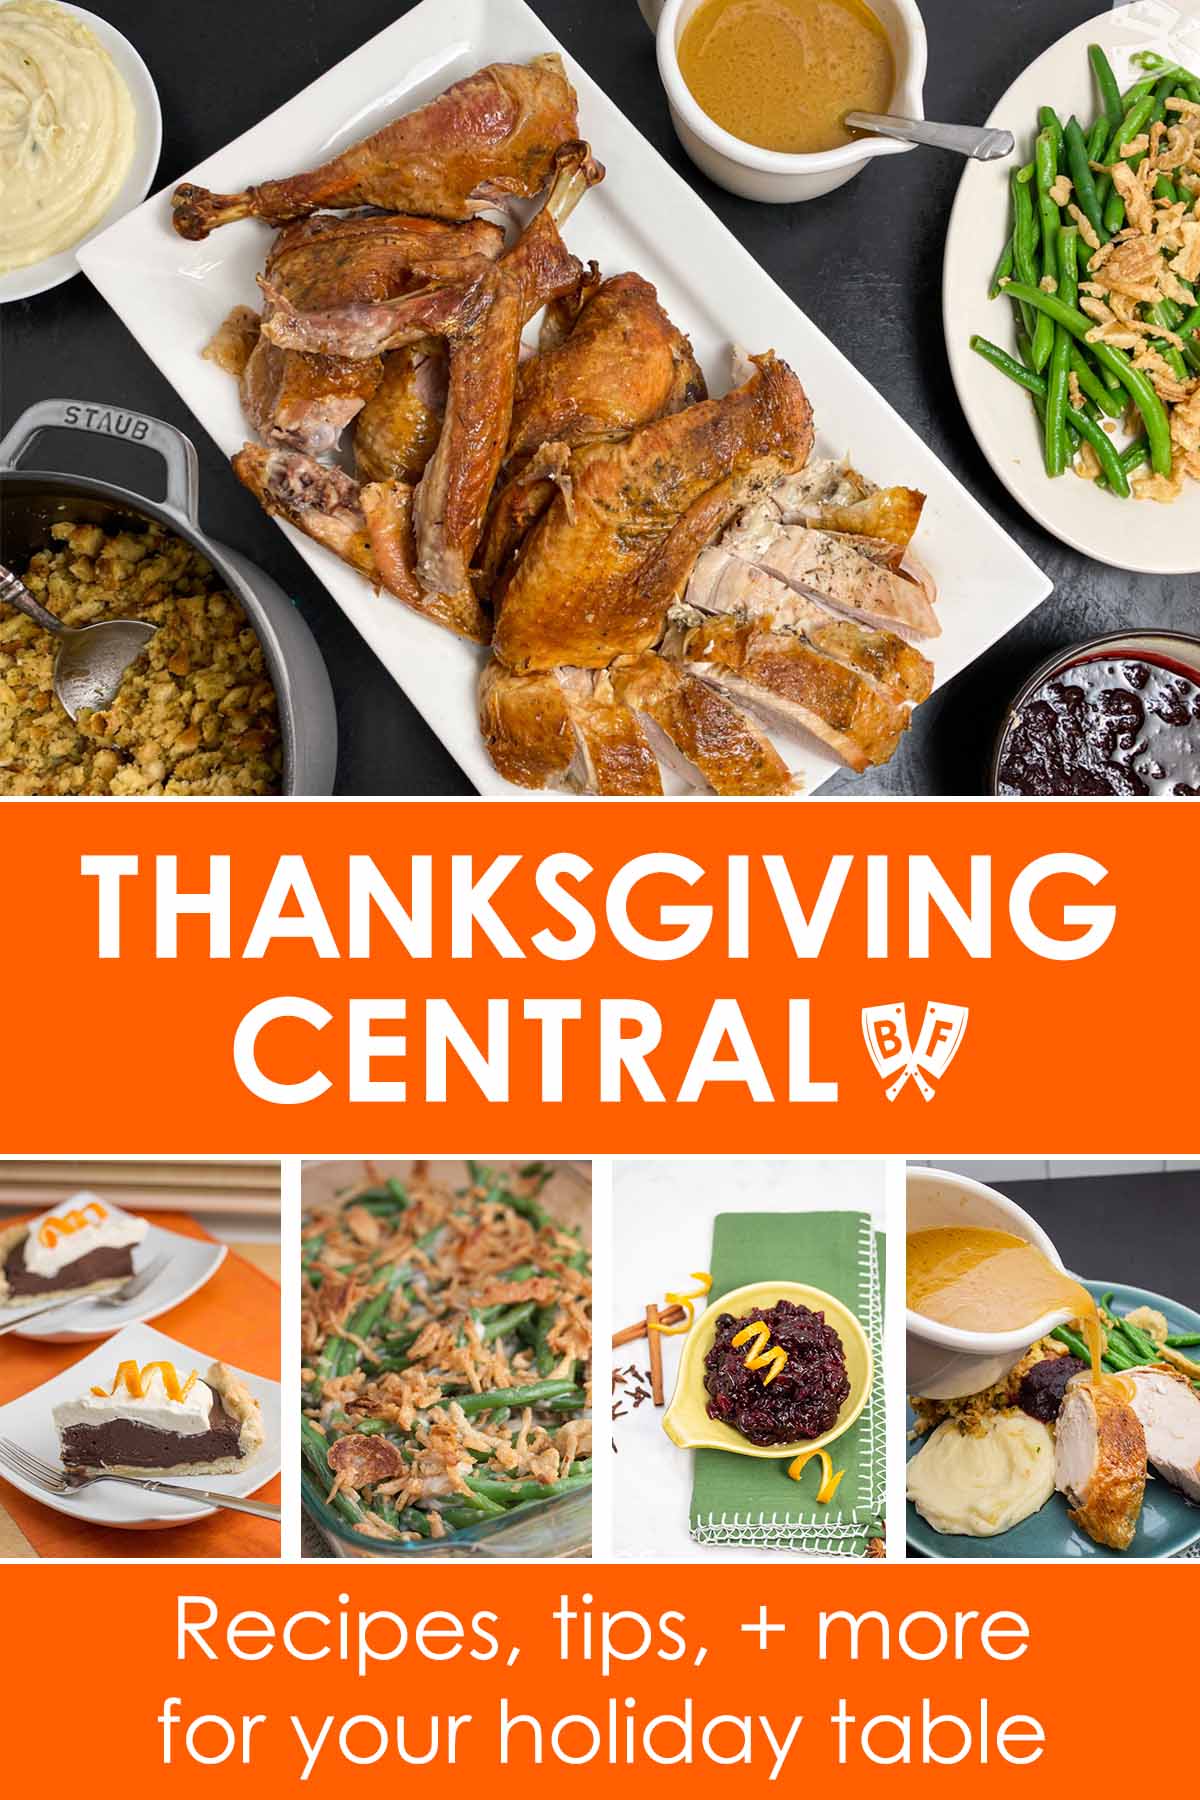 Collage of Thanksgiving recipe images with text that reads, "Thanksgiving Central: Recipes, tips, + more for your holiday table".